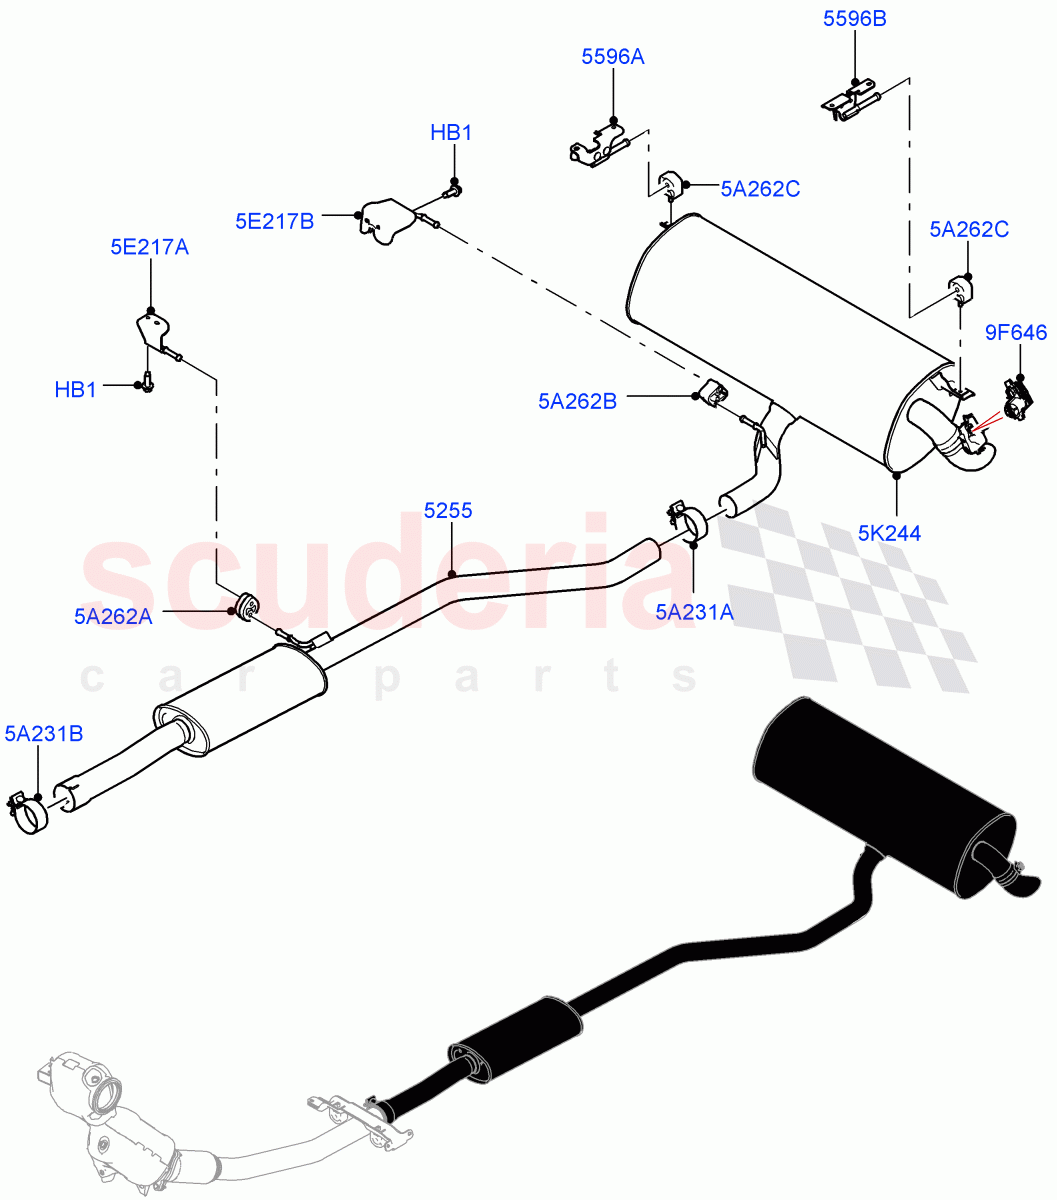 Rear Exhaust System(1.5L AJ20P3 Petrol High,Halewood (UK))((V)FROMMH000001) of Land Rover Land Rover Range Rover Evoque (2019+) [1.5 I3 Turbo Petrol AJ20P3]